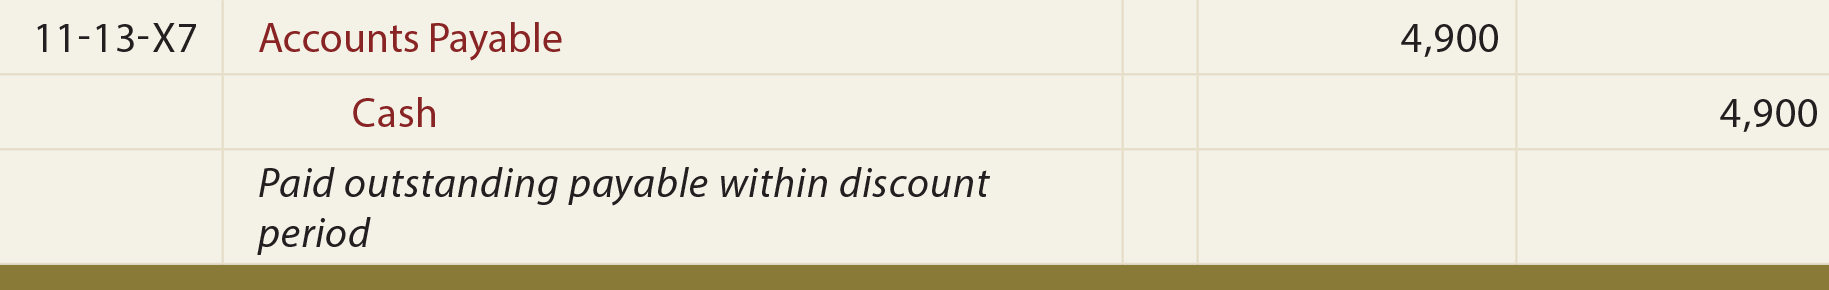 Purchases With Net Discount General Journal Entry - Entry to record payment within discount period